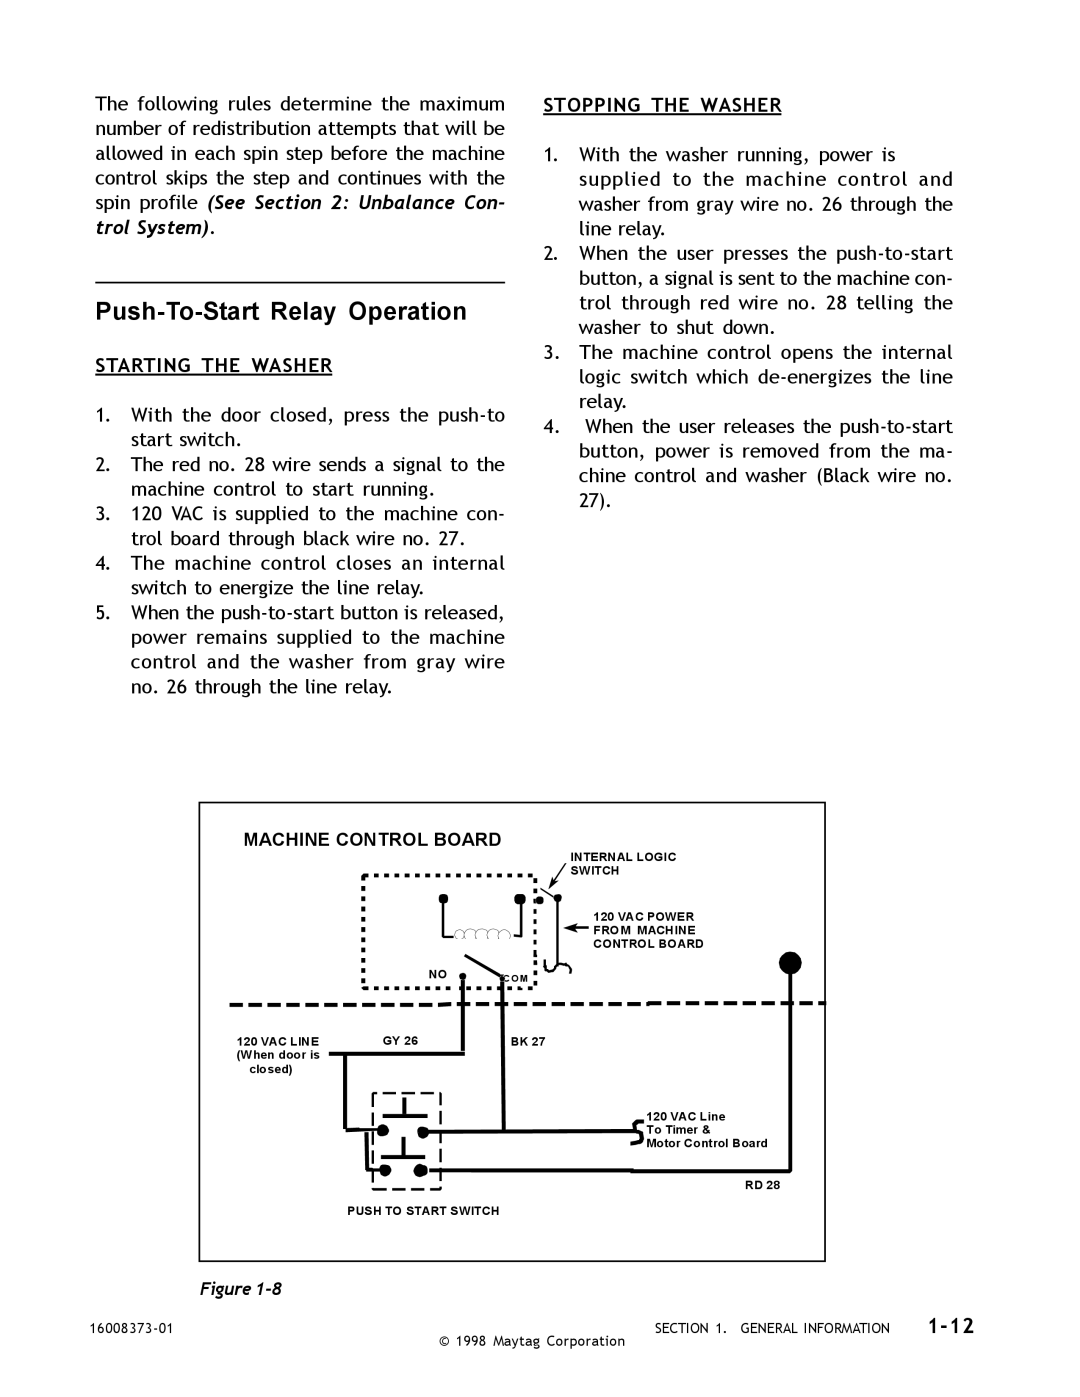 Whirlpool MAH3000 service manual Push-To-Start Relay Operation, 1-12, Starting The Washer, Stopping The Washer 